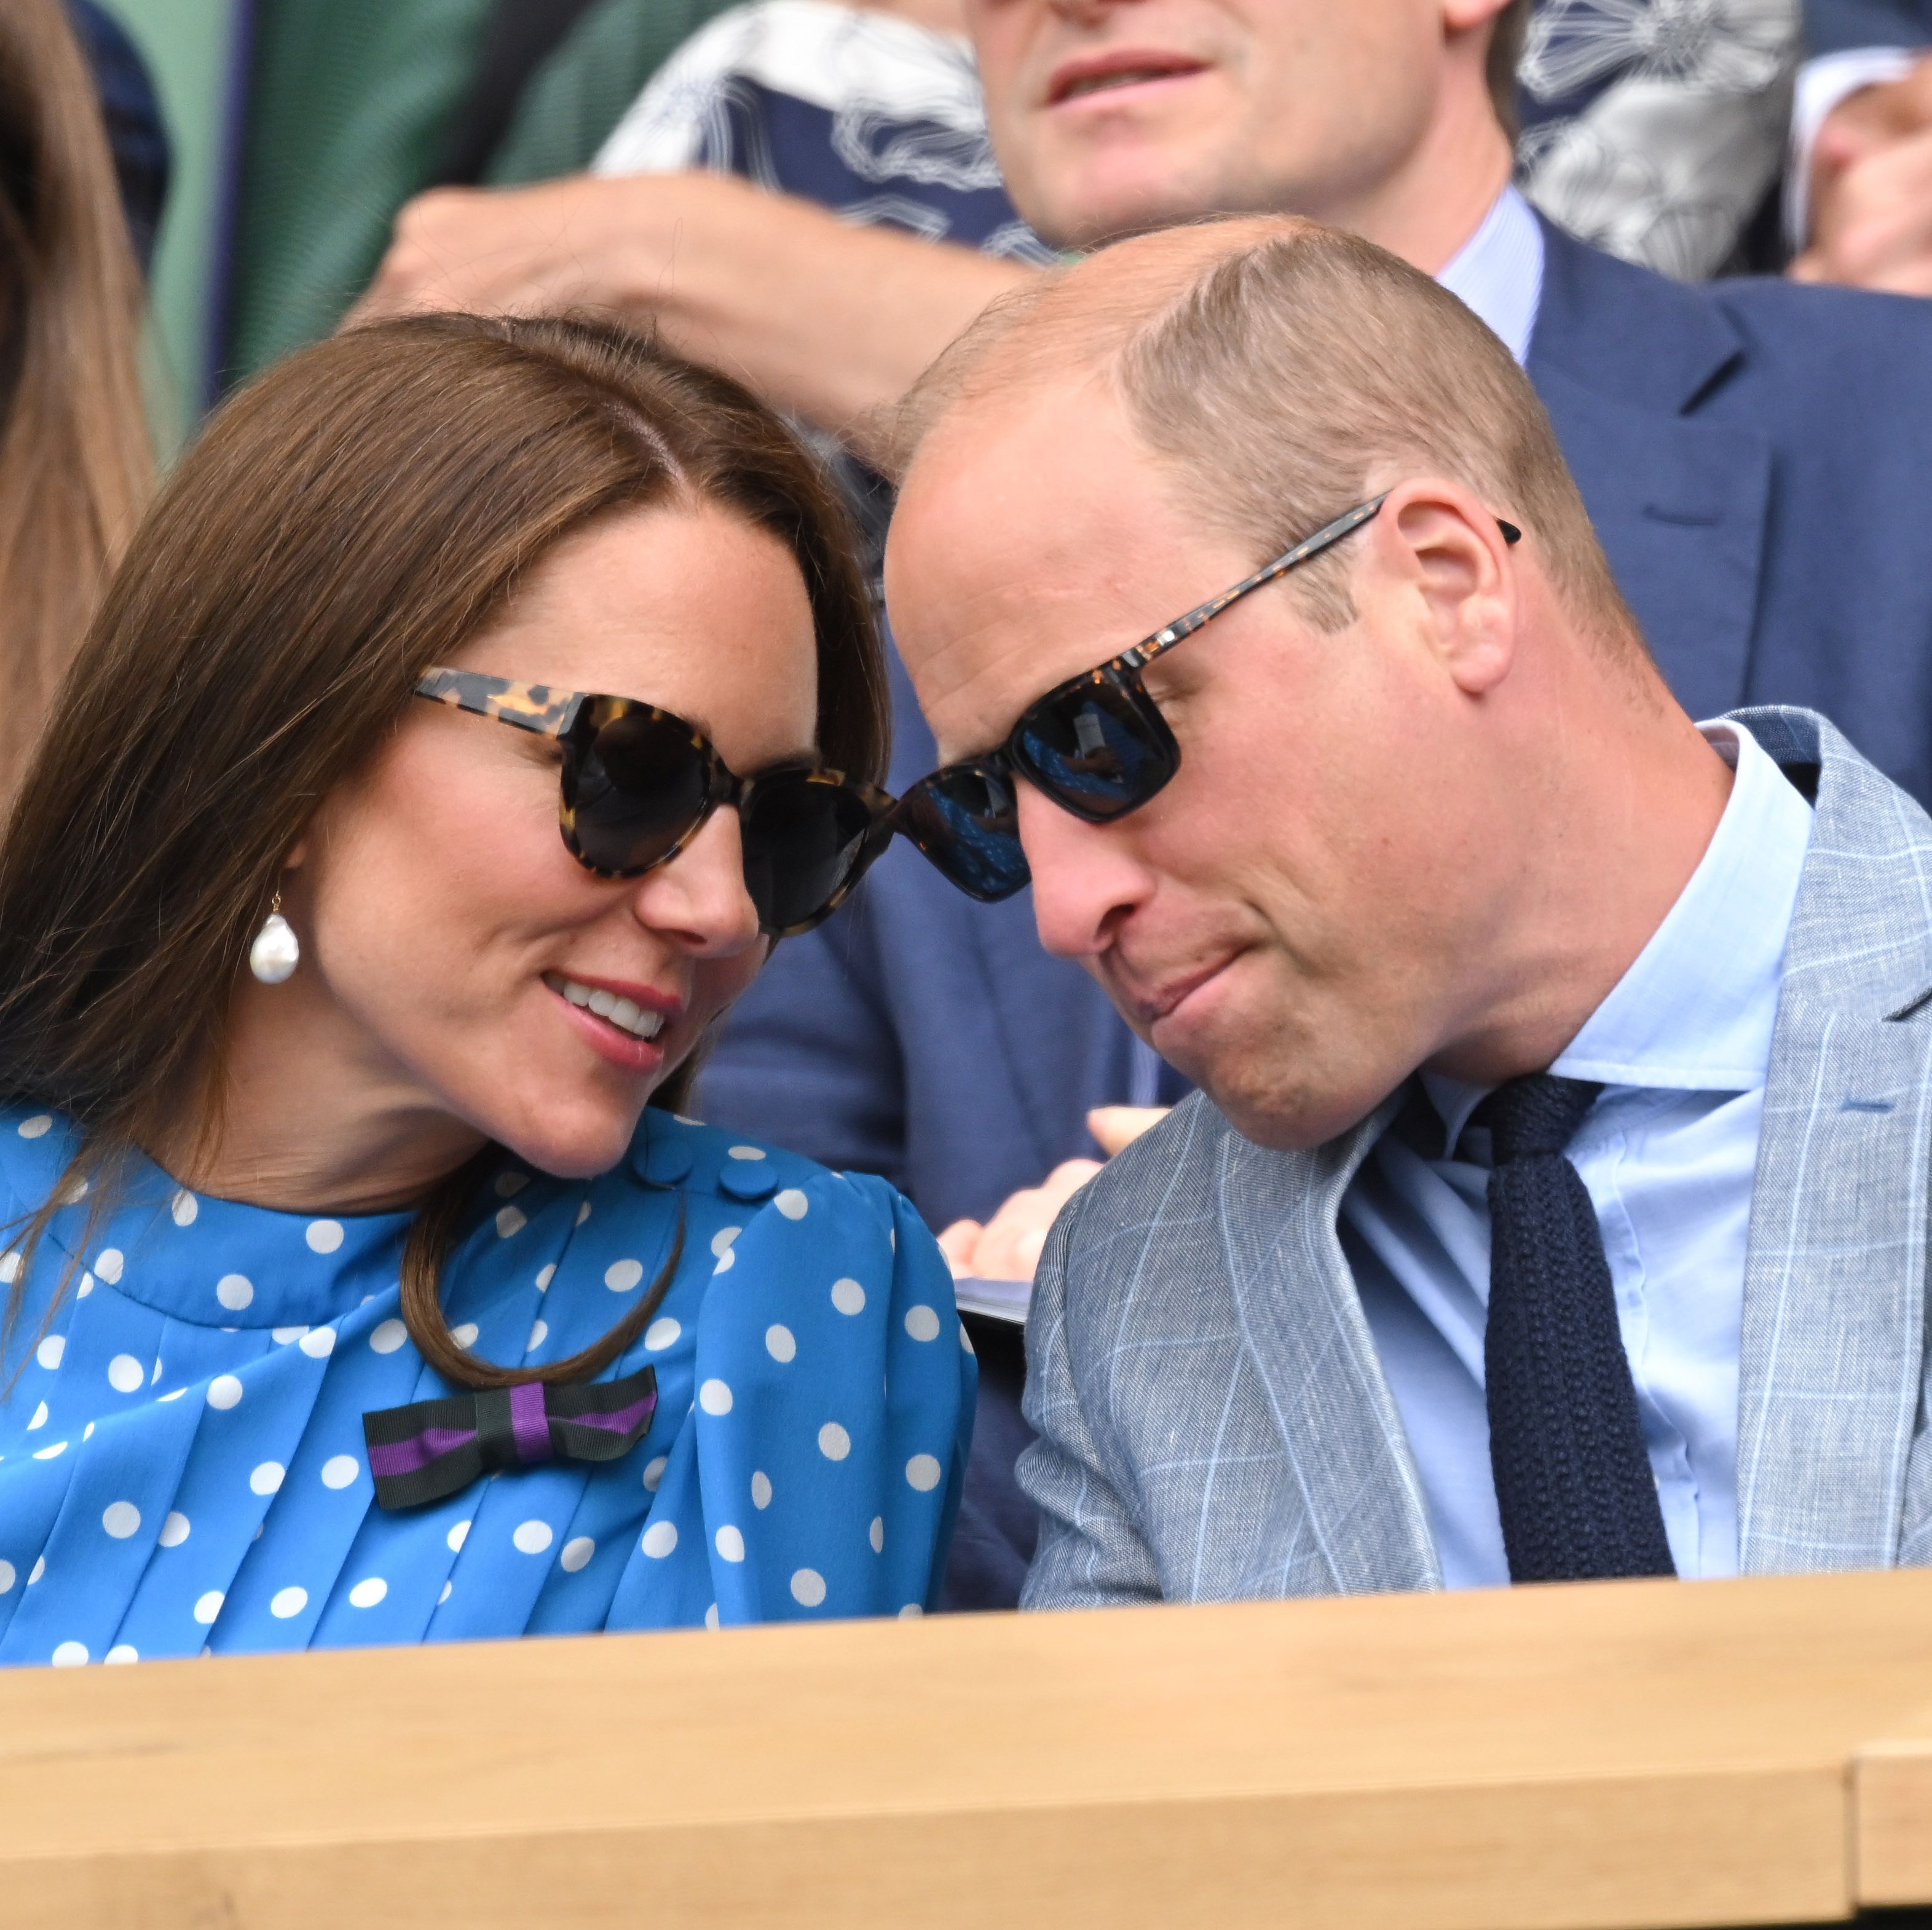 Body Language Expert Breaks Down Kate Middleton and Prince William's 